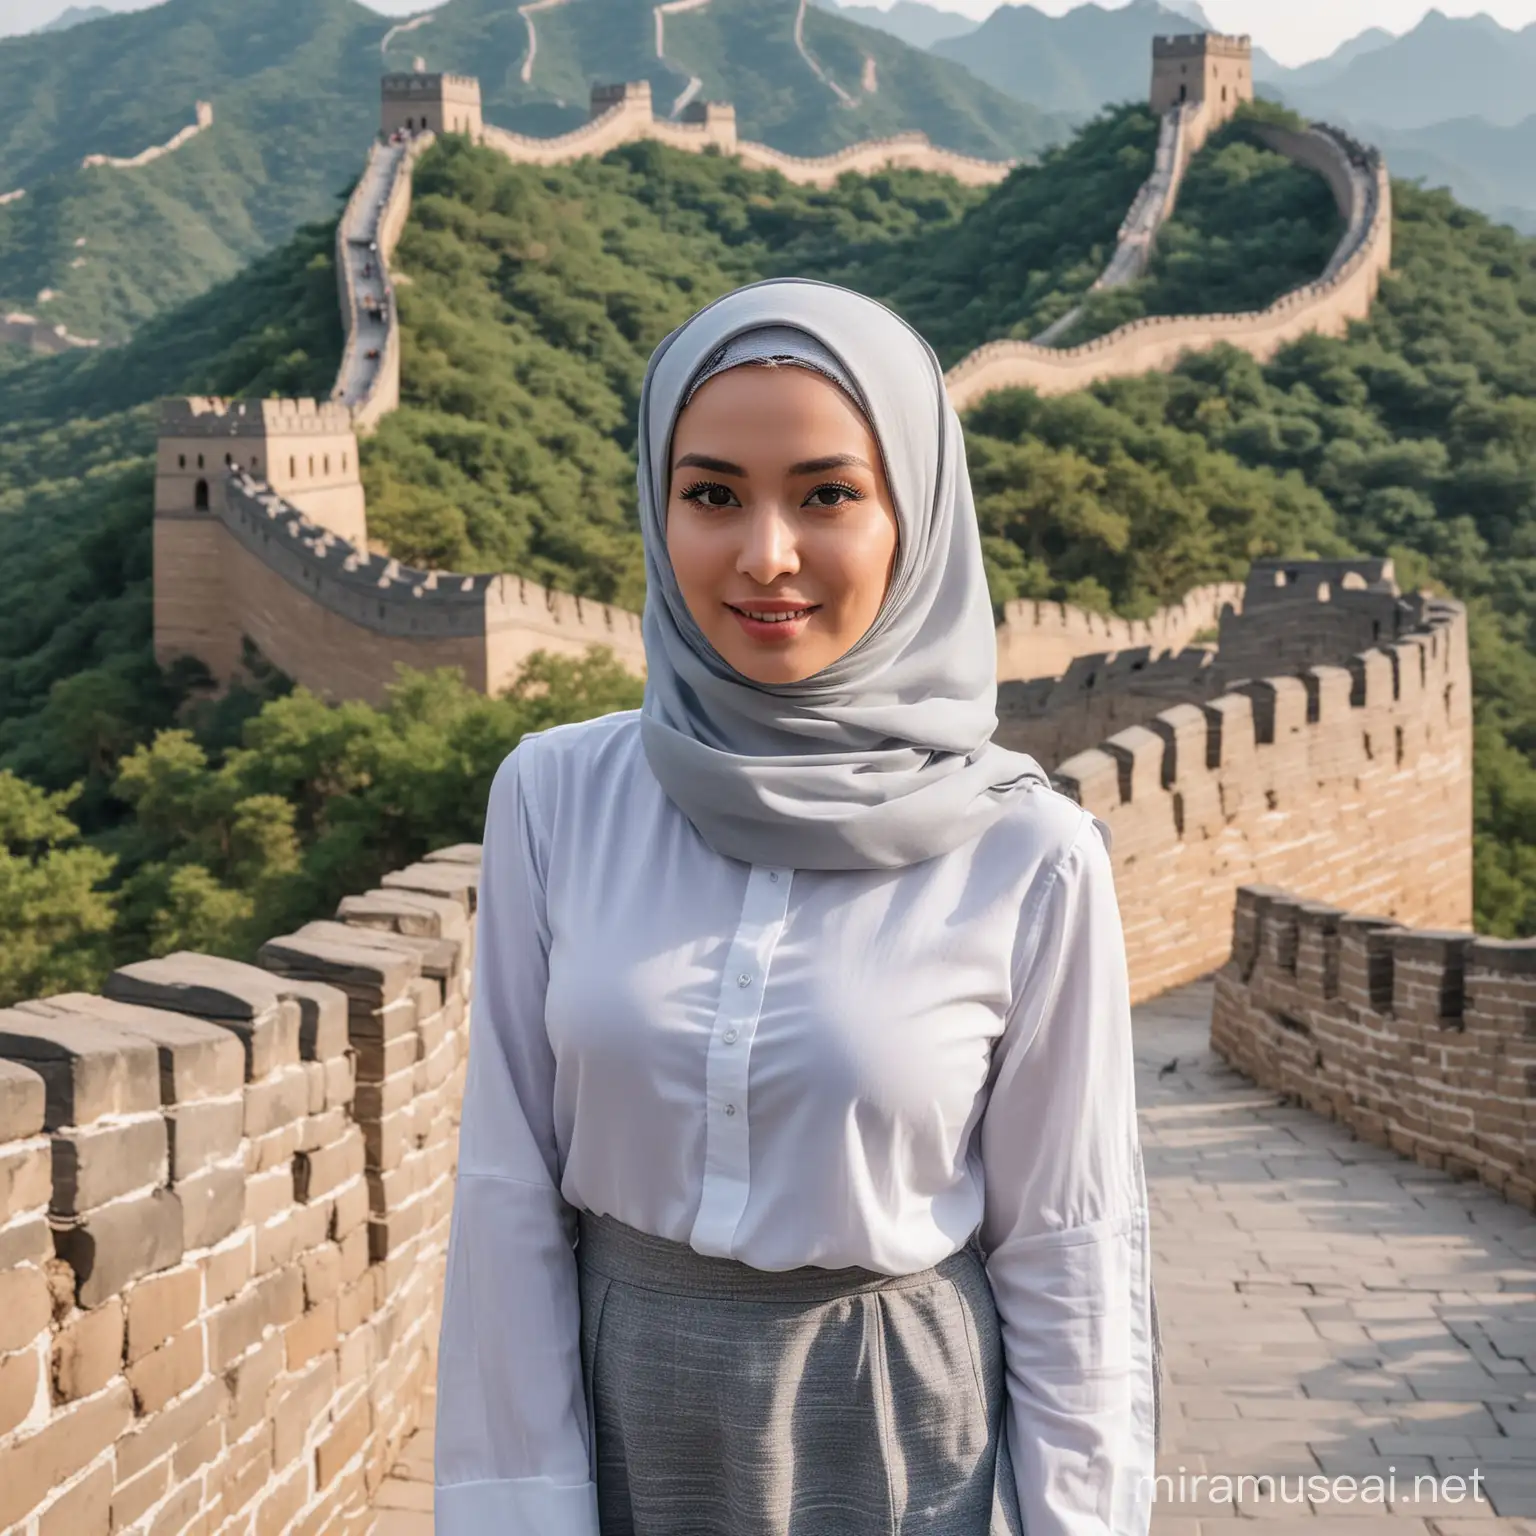 Graceful Woman in Traditional Hijab and White Hem Shirt at the Great Wall of China